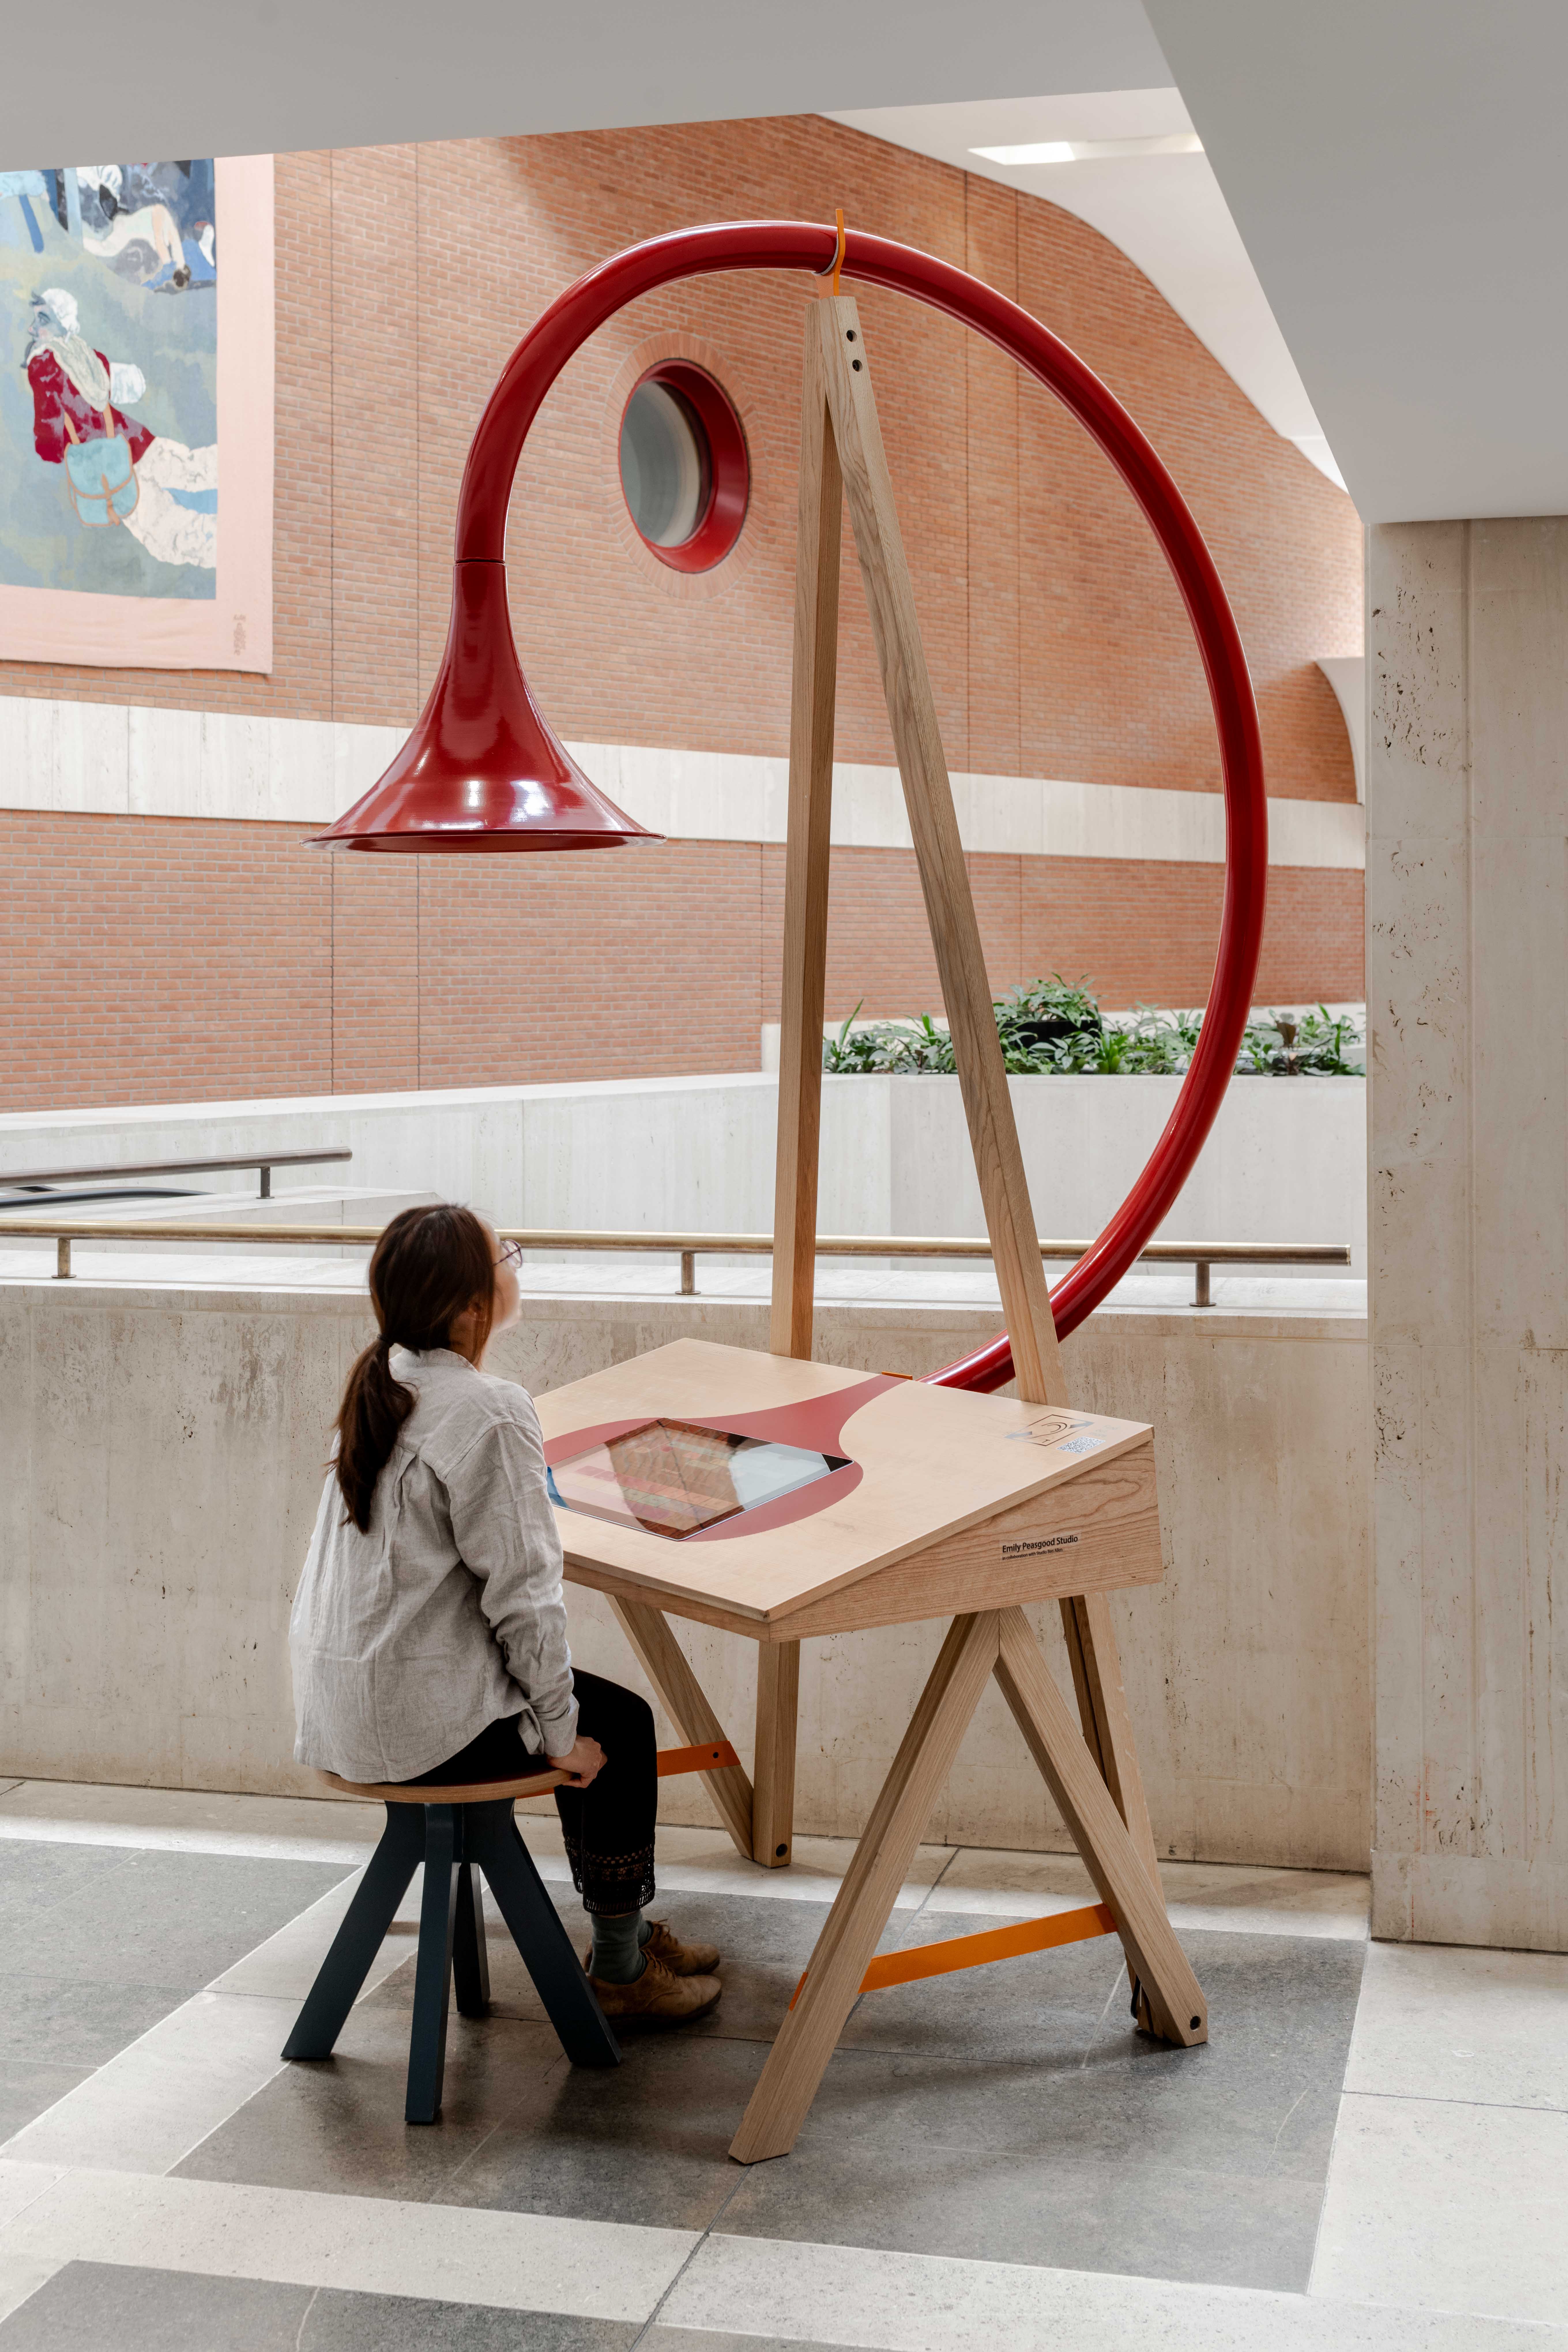 Image of Emily Peasgood's Listening Desk in The British Library. A young woman is sat at the desk, playing with the interactive screen. A large horn is above her head.